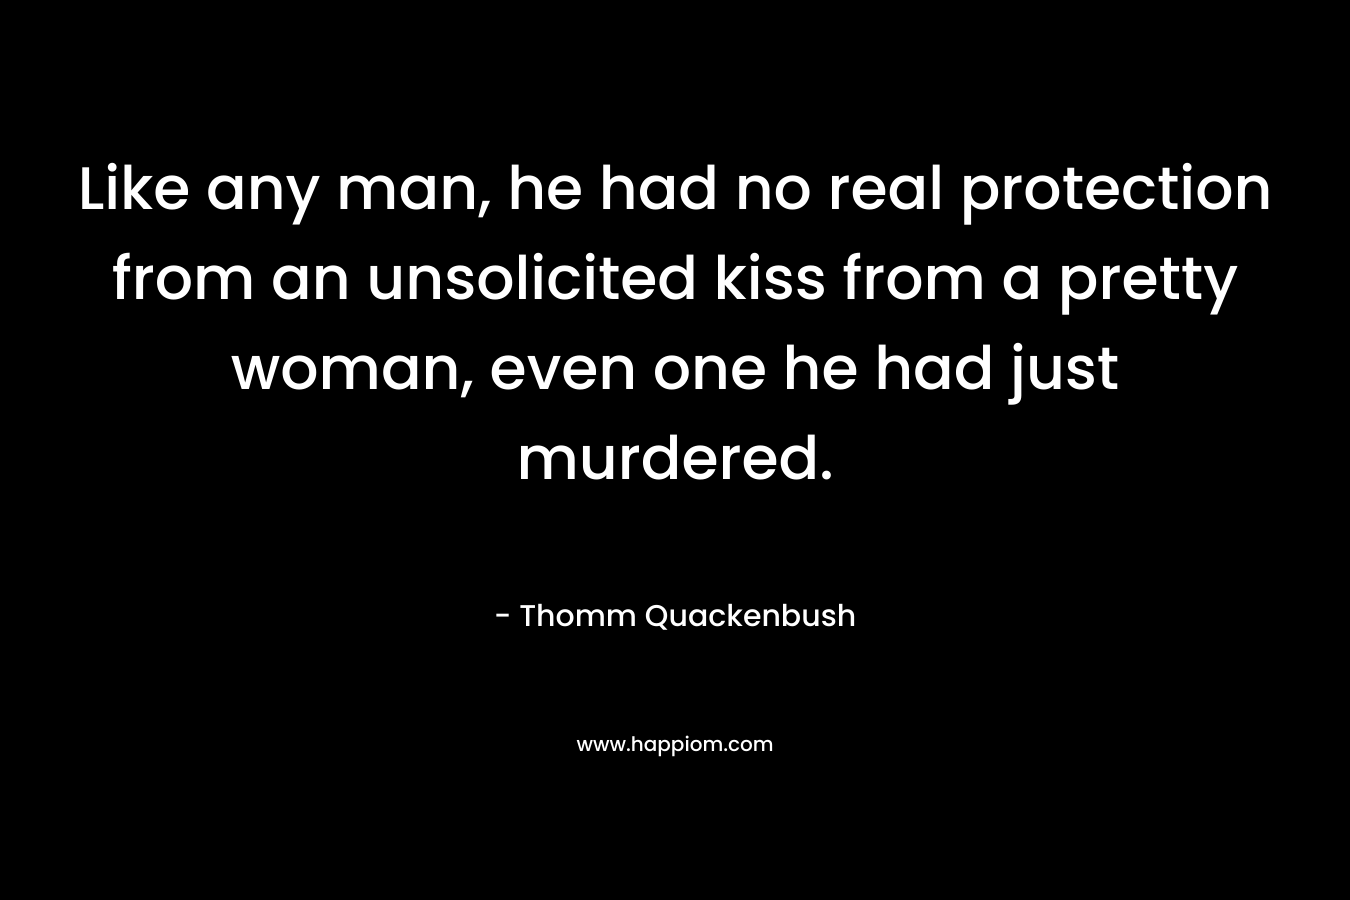 Like any man, he had no real protection from an unsolicited kiss from a pretty woman, even one he had just murdered. – Thomm Quackenbush